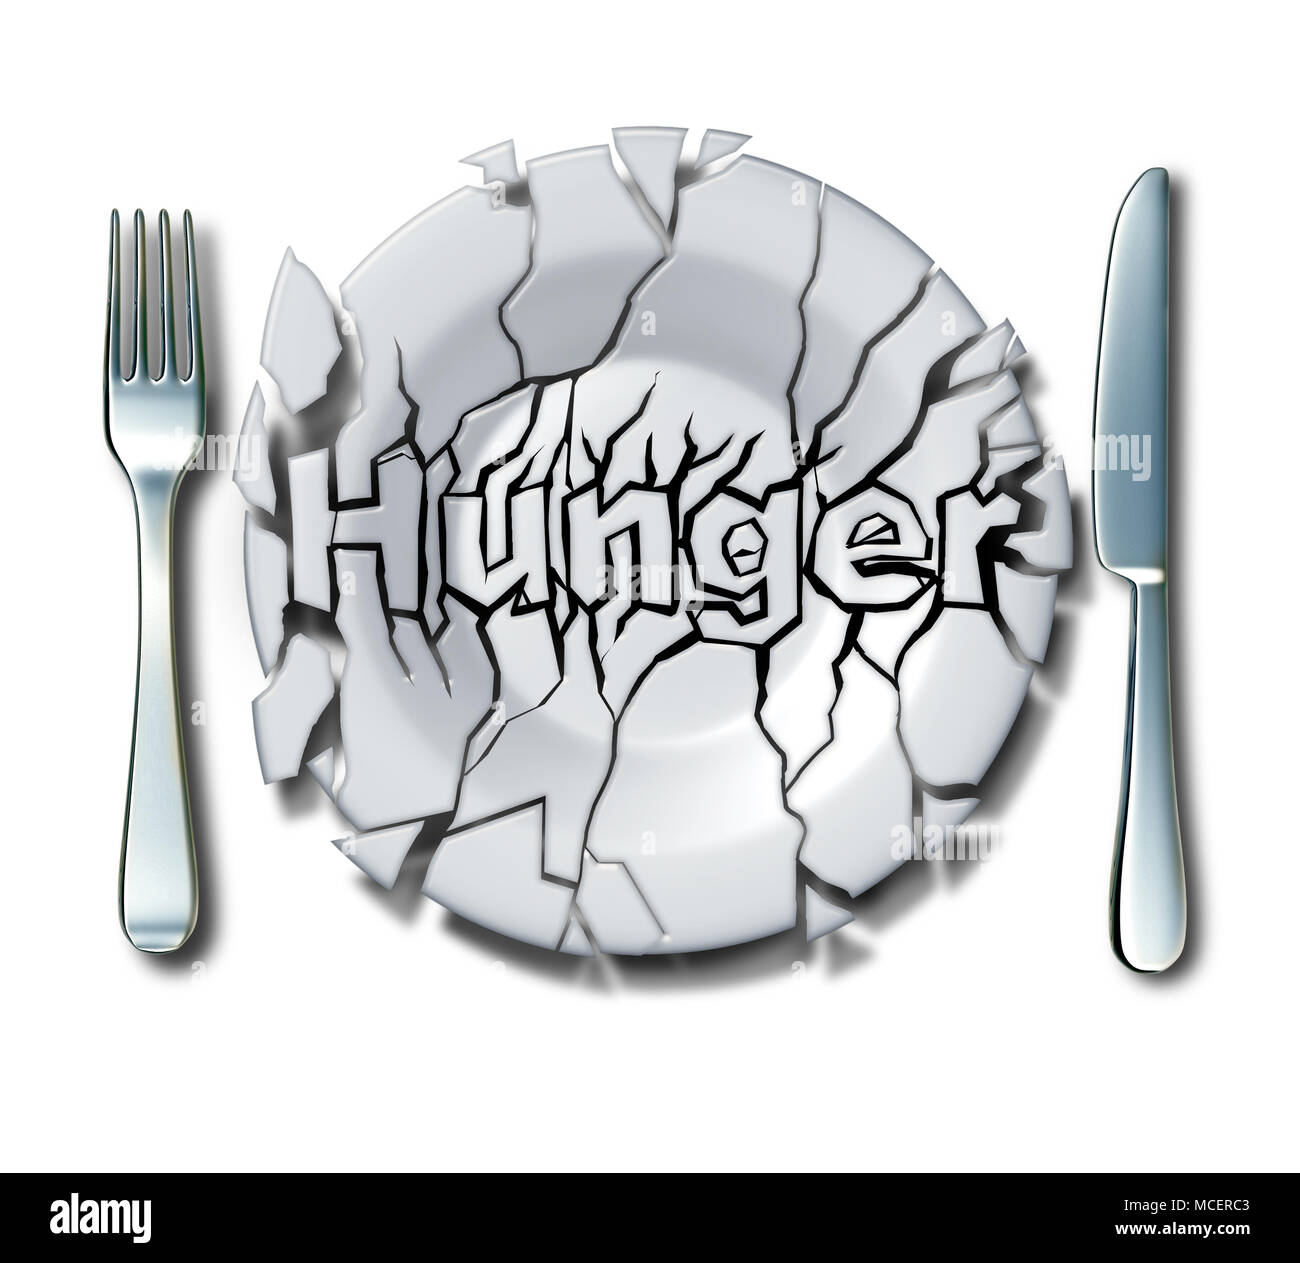 Hunger concept and hungry idea as a cracked broken plate with text as a poverty and malnutrition symbol as a 3D illustration. Stock Photo